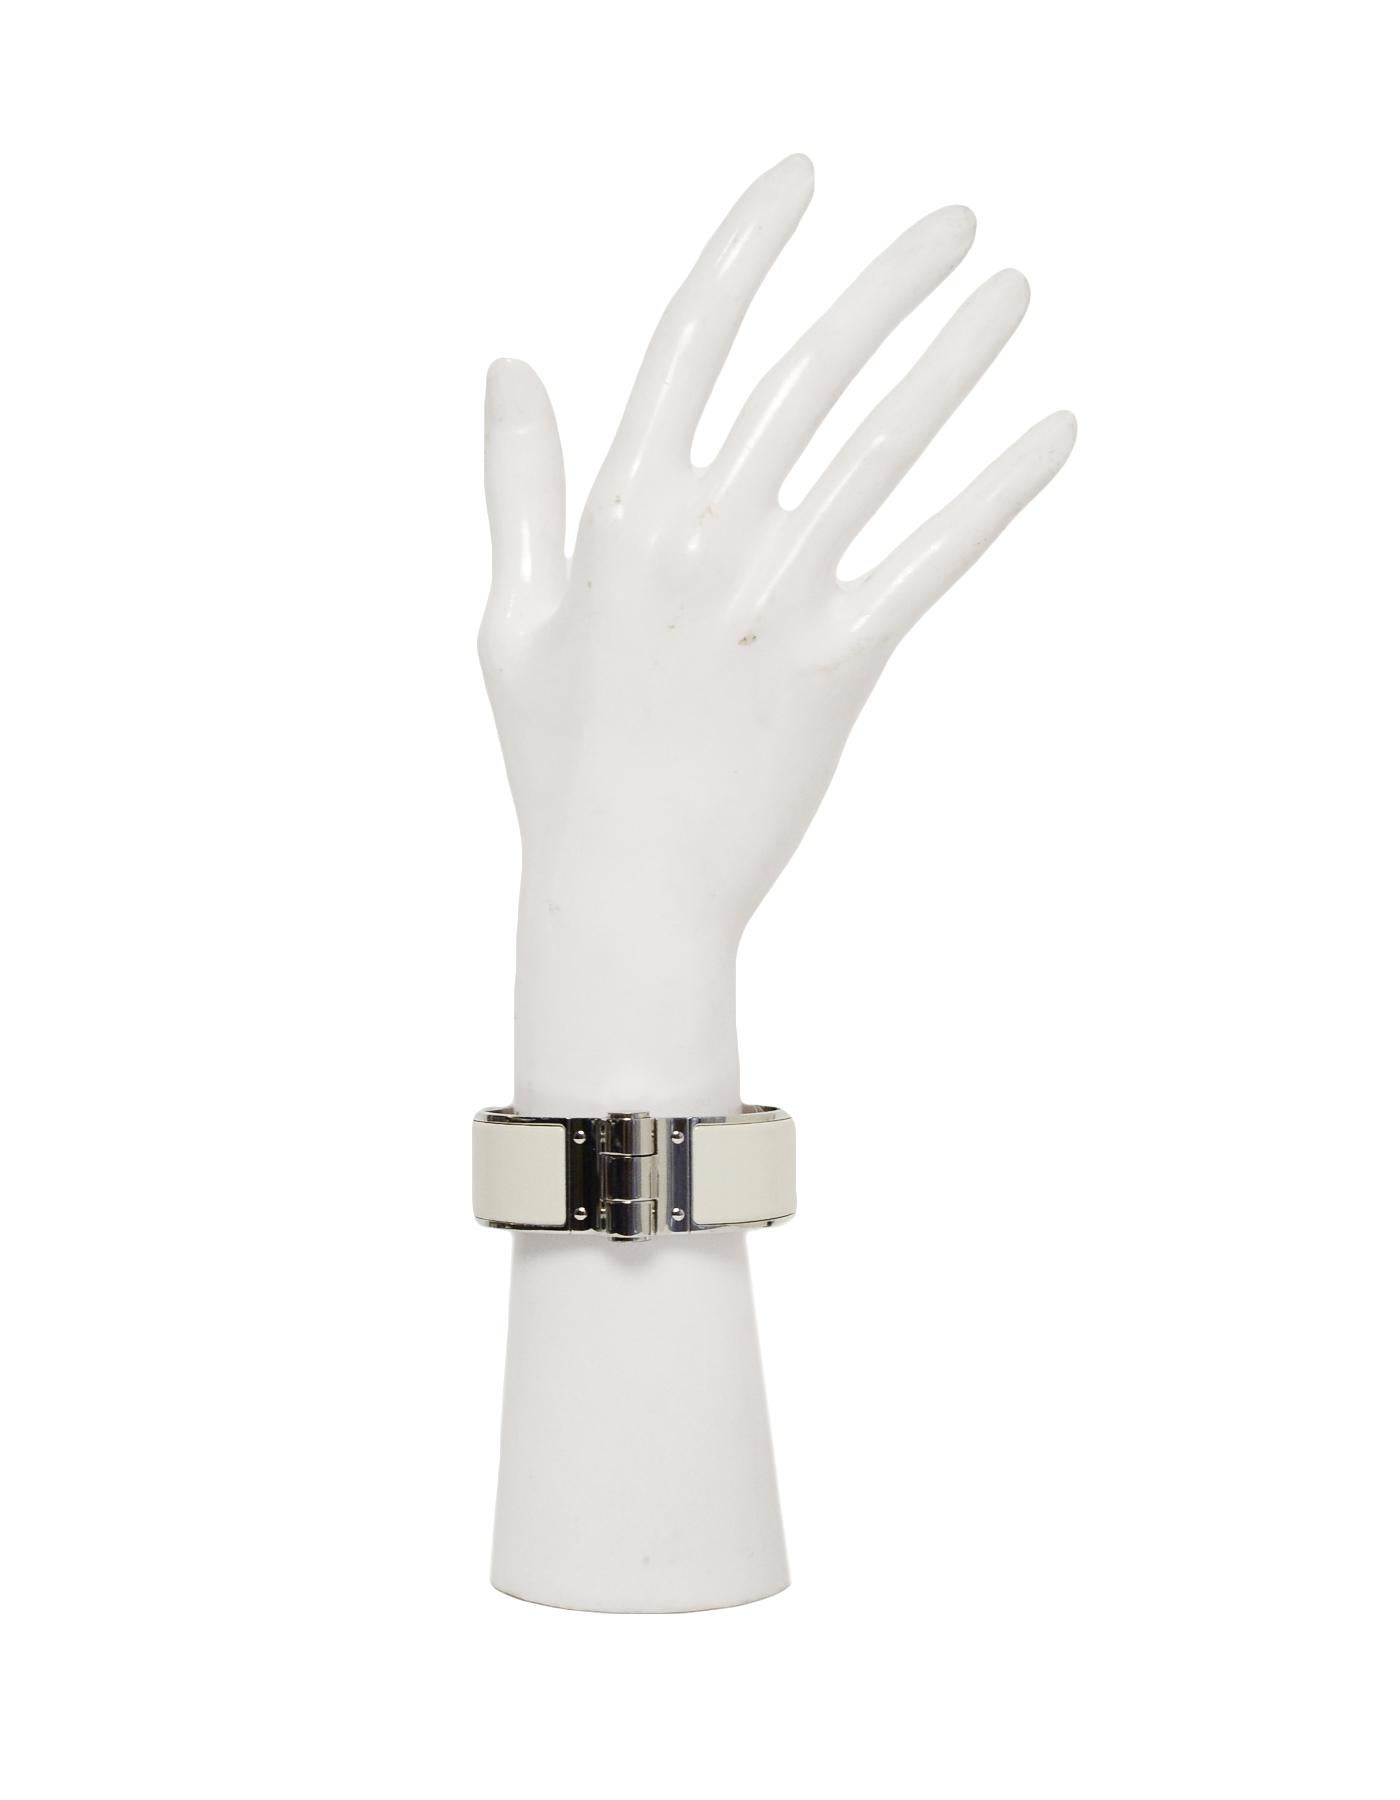 Hermes NWT Palladium/Pannnacotta White Enamel Wide Hinged Bracelet sz Small
Made In: France
Color: White, silvertone
Materials: Palladium
Hallmarks: Hermes SP 01 26
Closure/Opening: Push clasp
Overall Condition: New with tags
Estimated Retail: $660